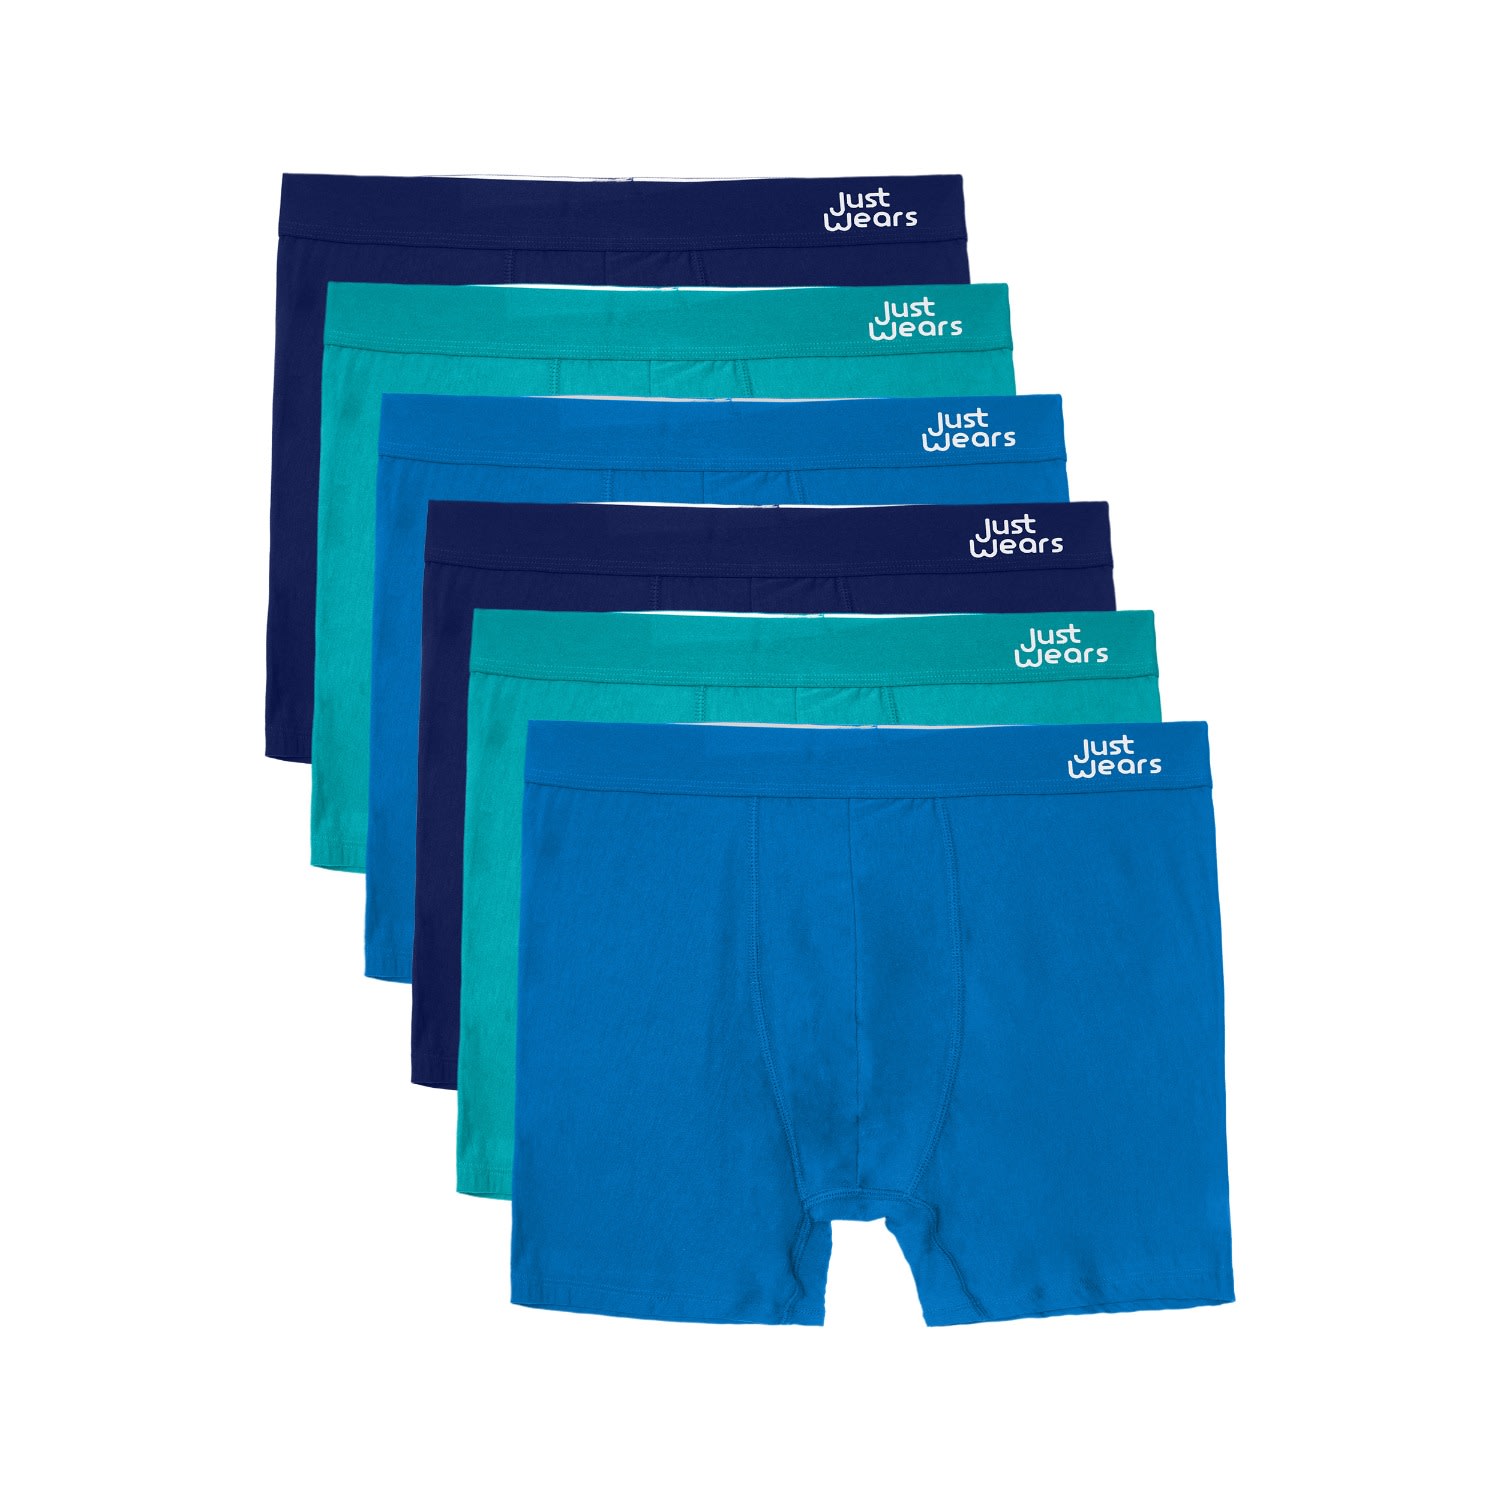 Justwears Men's Green / Blue Super Soft Boxer Briefs With Pouch - Anti-chafe & No Ride Up Design - Six Pack - In Multi